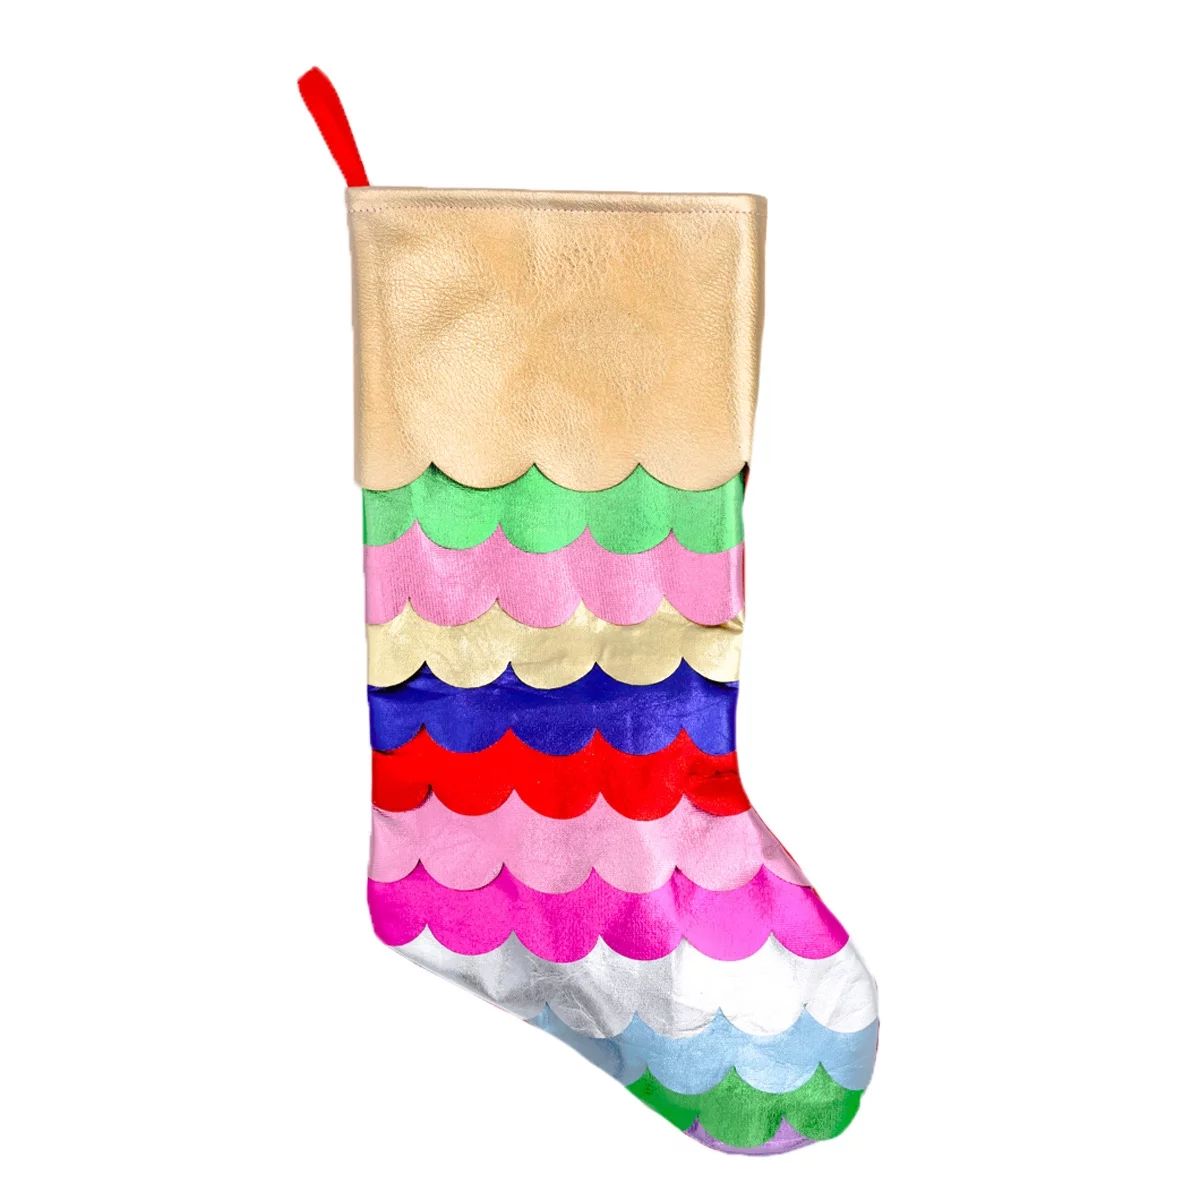 Packed Party 'Waves Of Fun' Christmas Stocking, Multi-Color | Walmart (US)